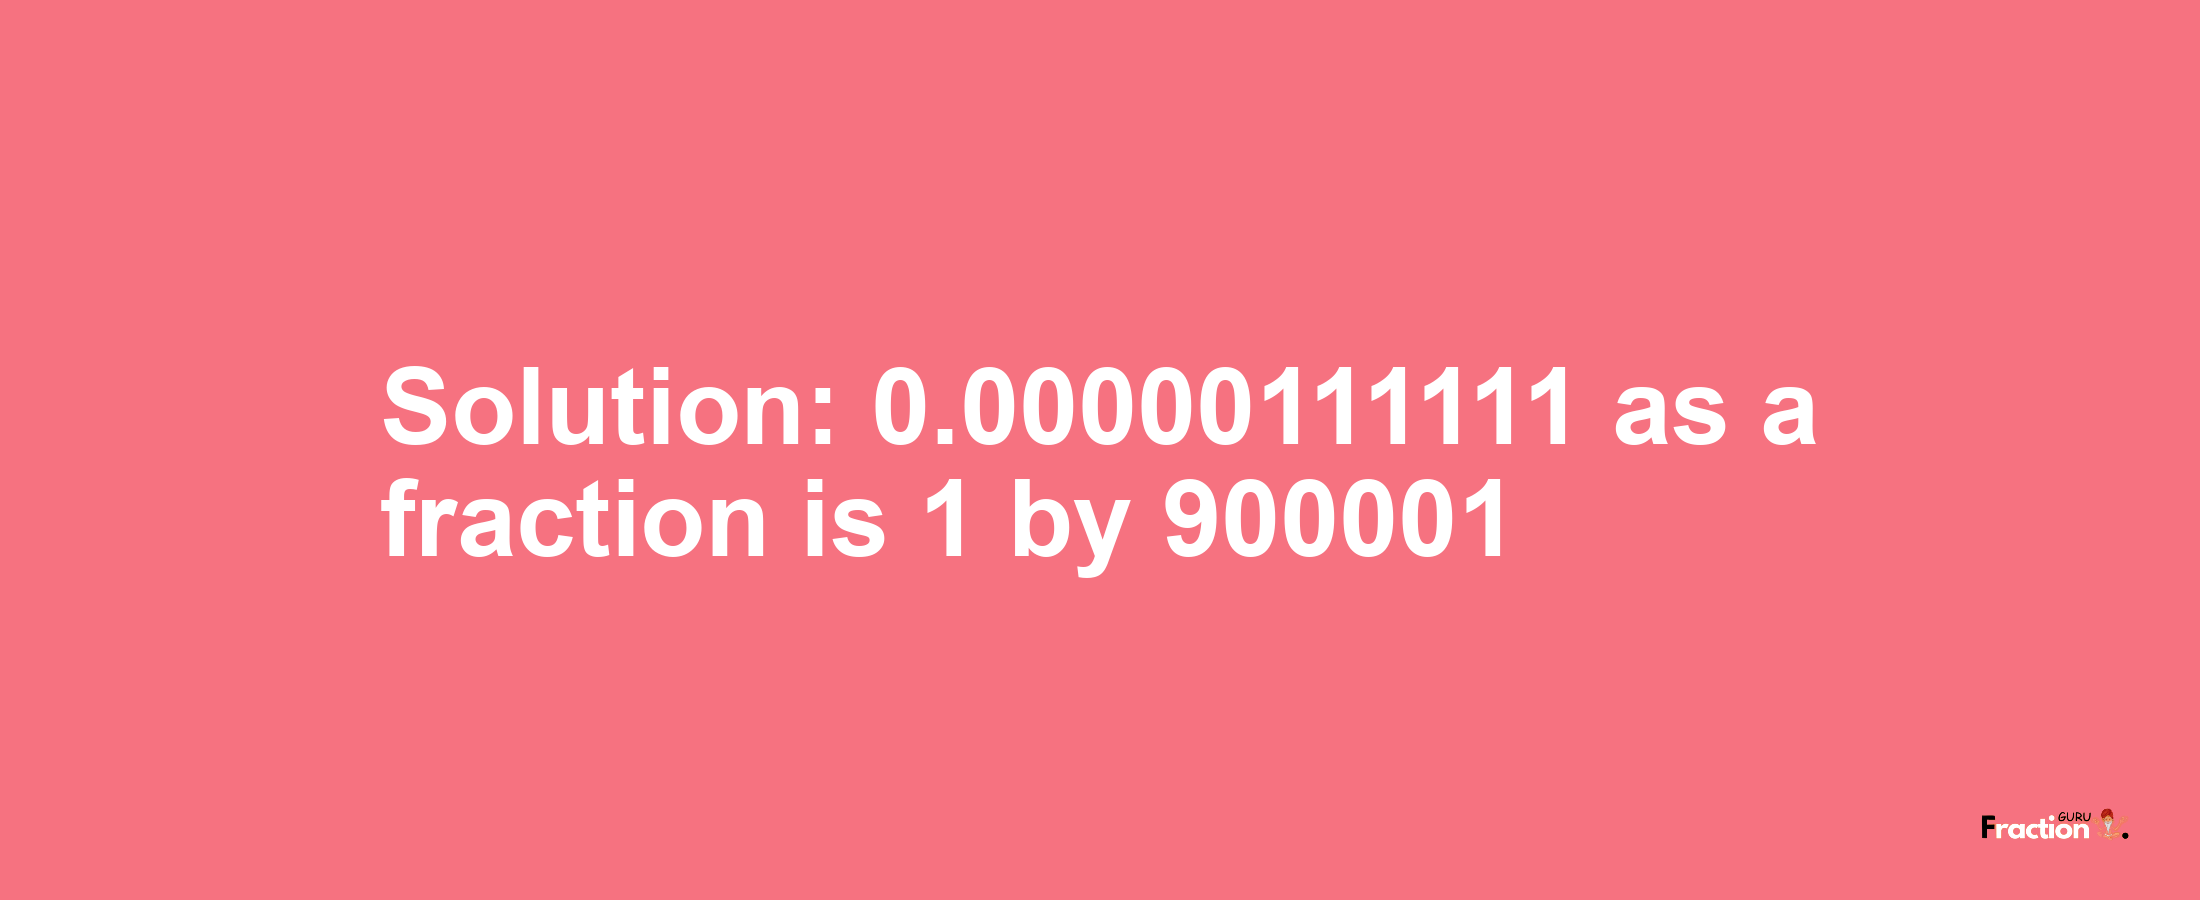 Solution:0.00000111111 as a fraction is 1/900001